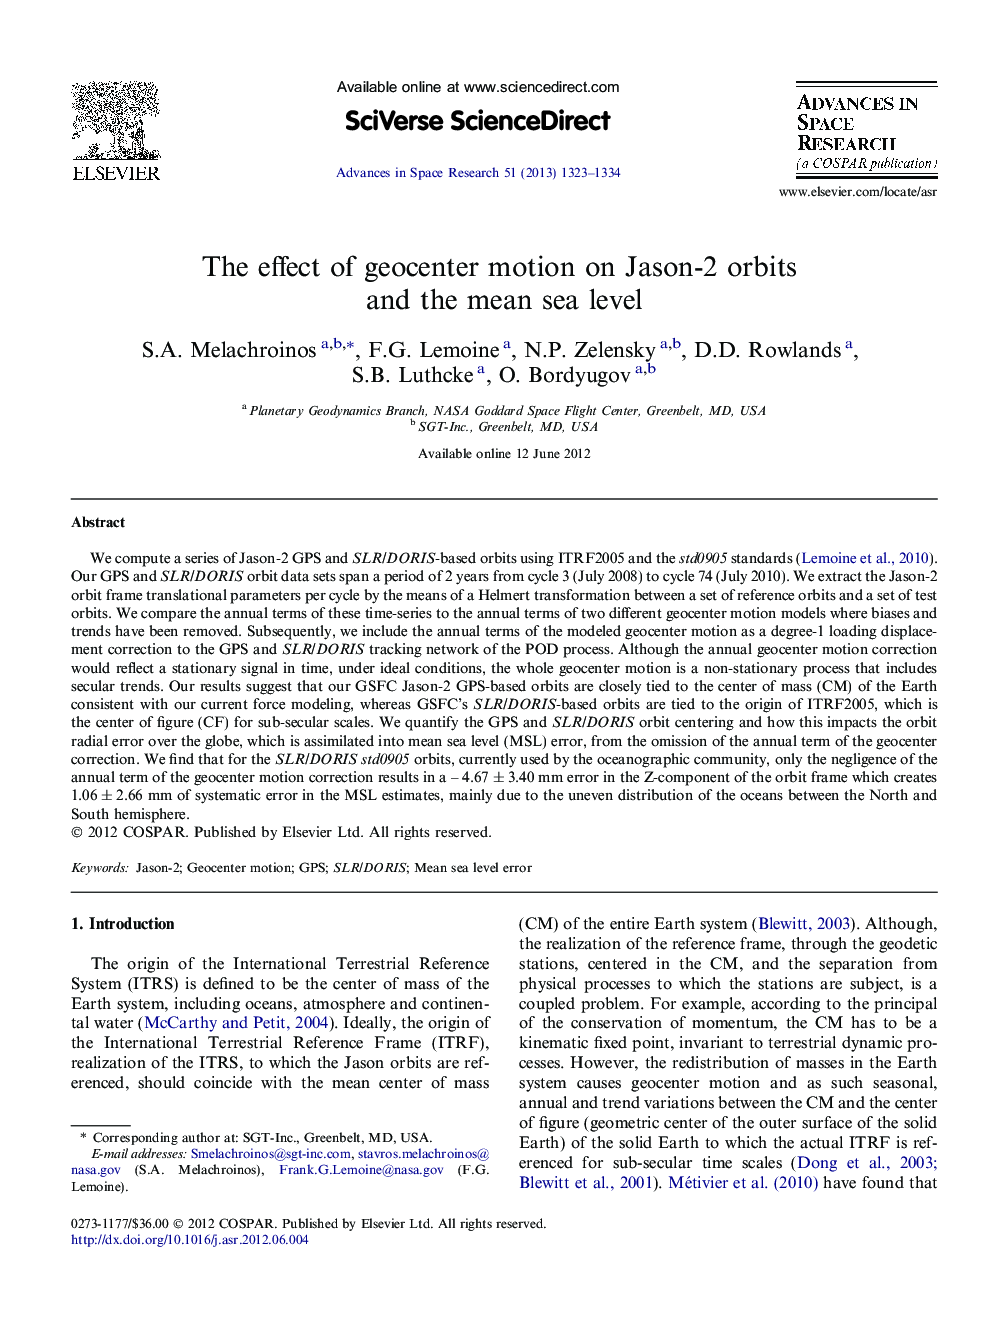 The effect of geocenter motion on Jason-2 orbits and the mean sea level